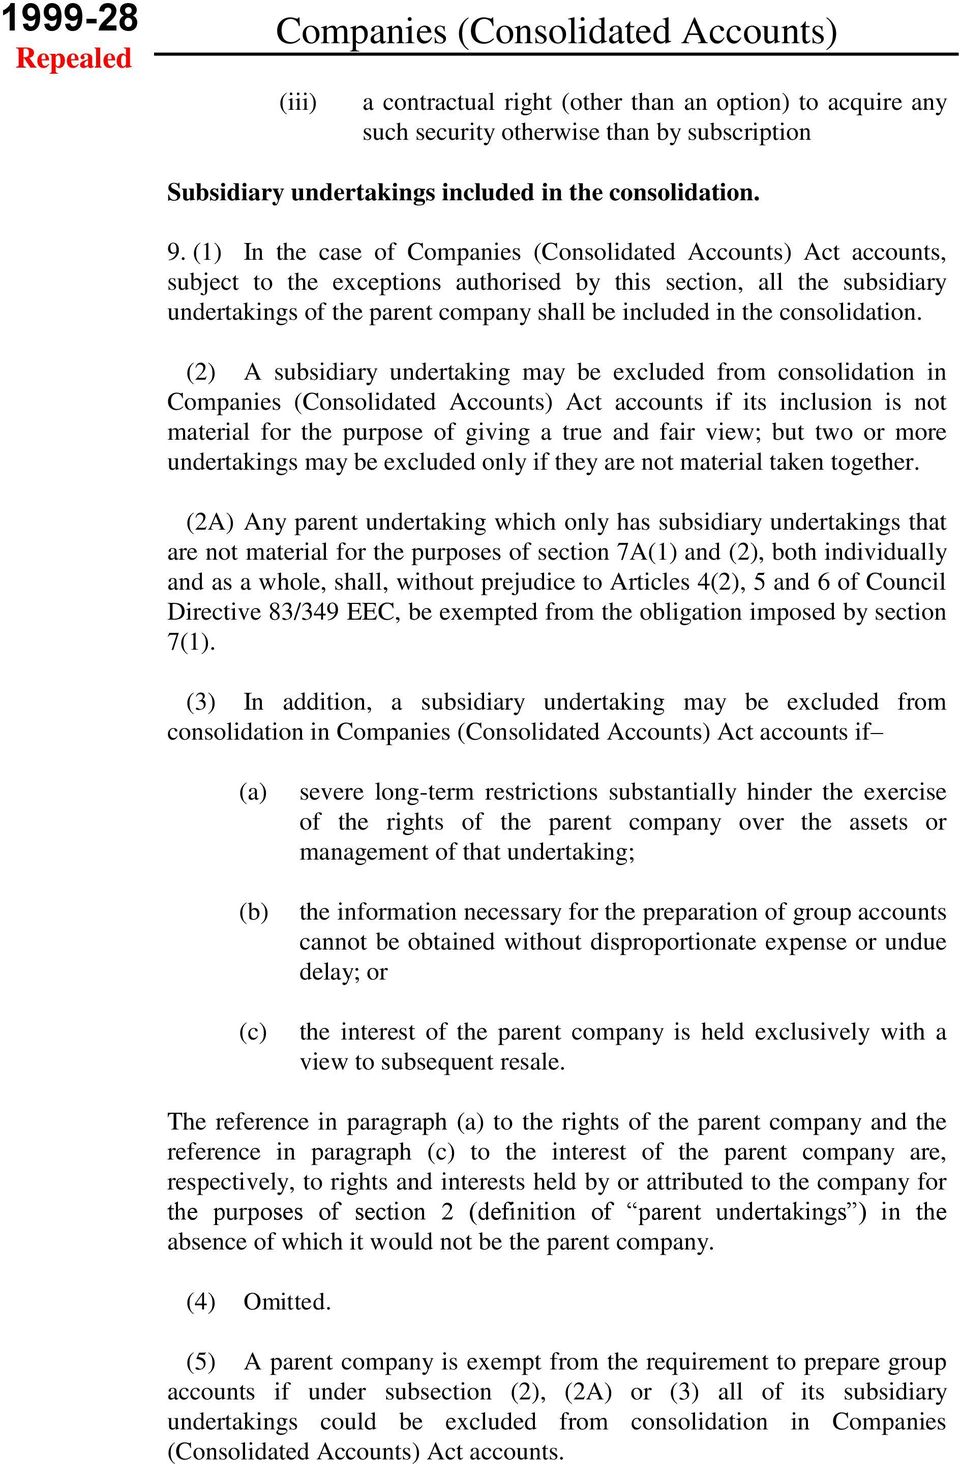 (1) In the case of Companies (Consolidated Accounts) Act accounts, subject to the exceptions authorised by this section, all the subsidiary undertakings of the parent company shall be included in the